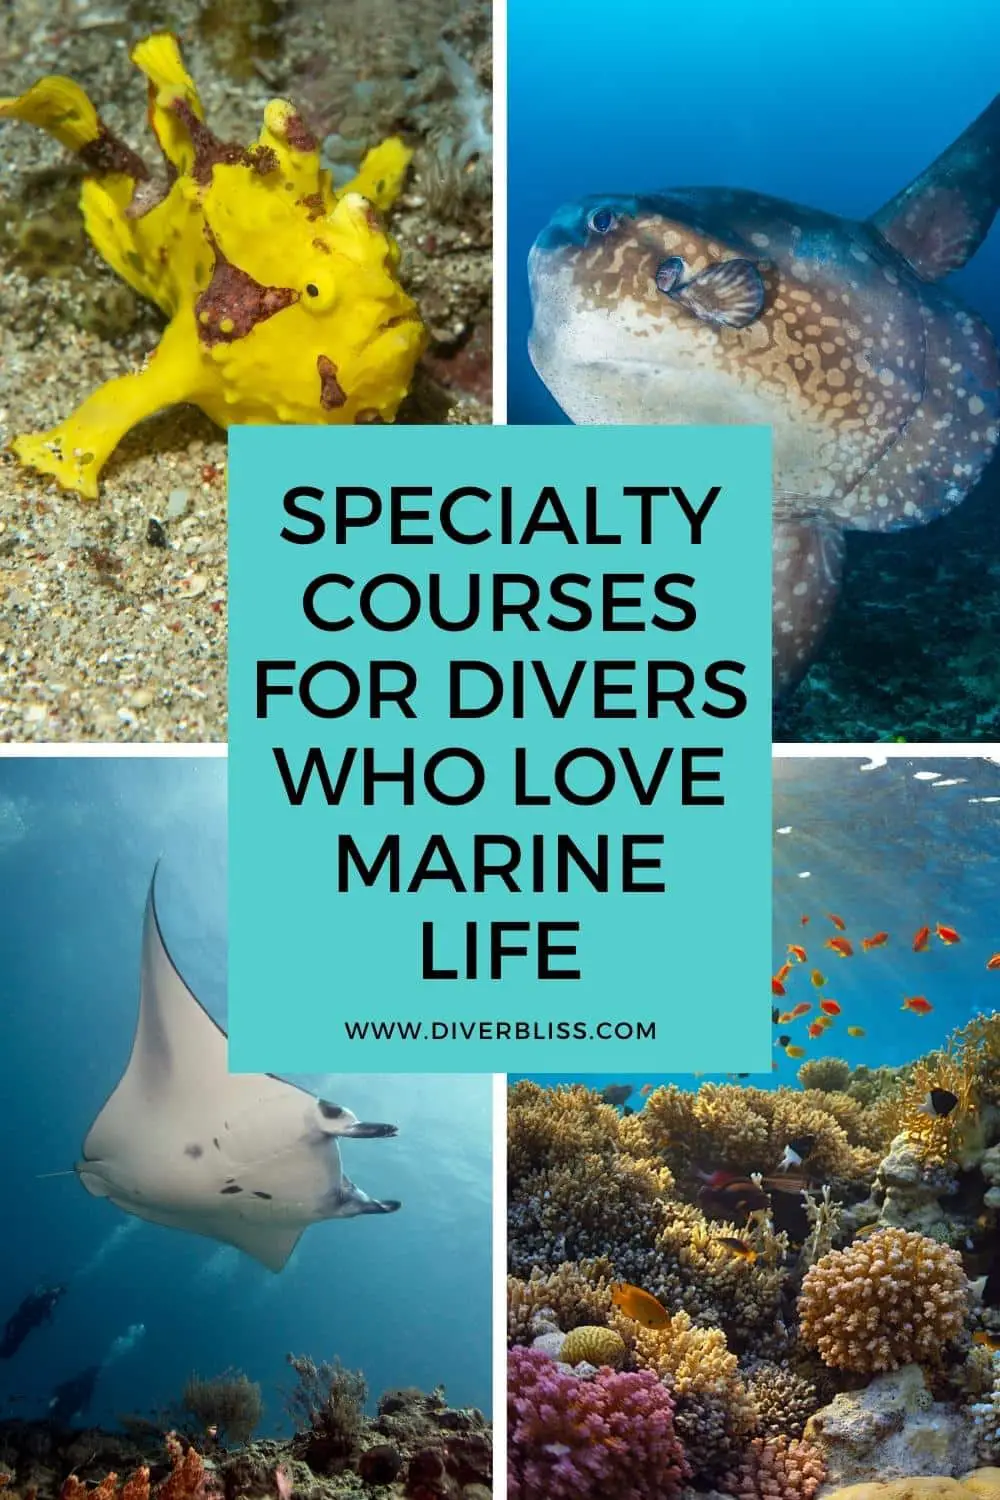 Specialty courses for divers who love marine life